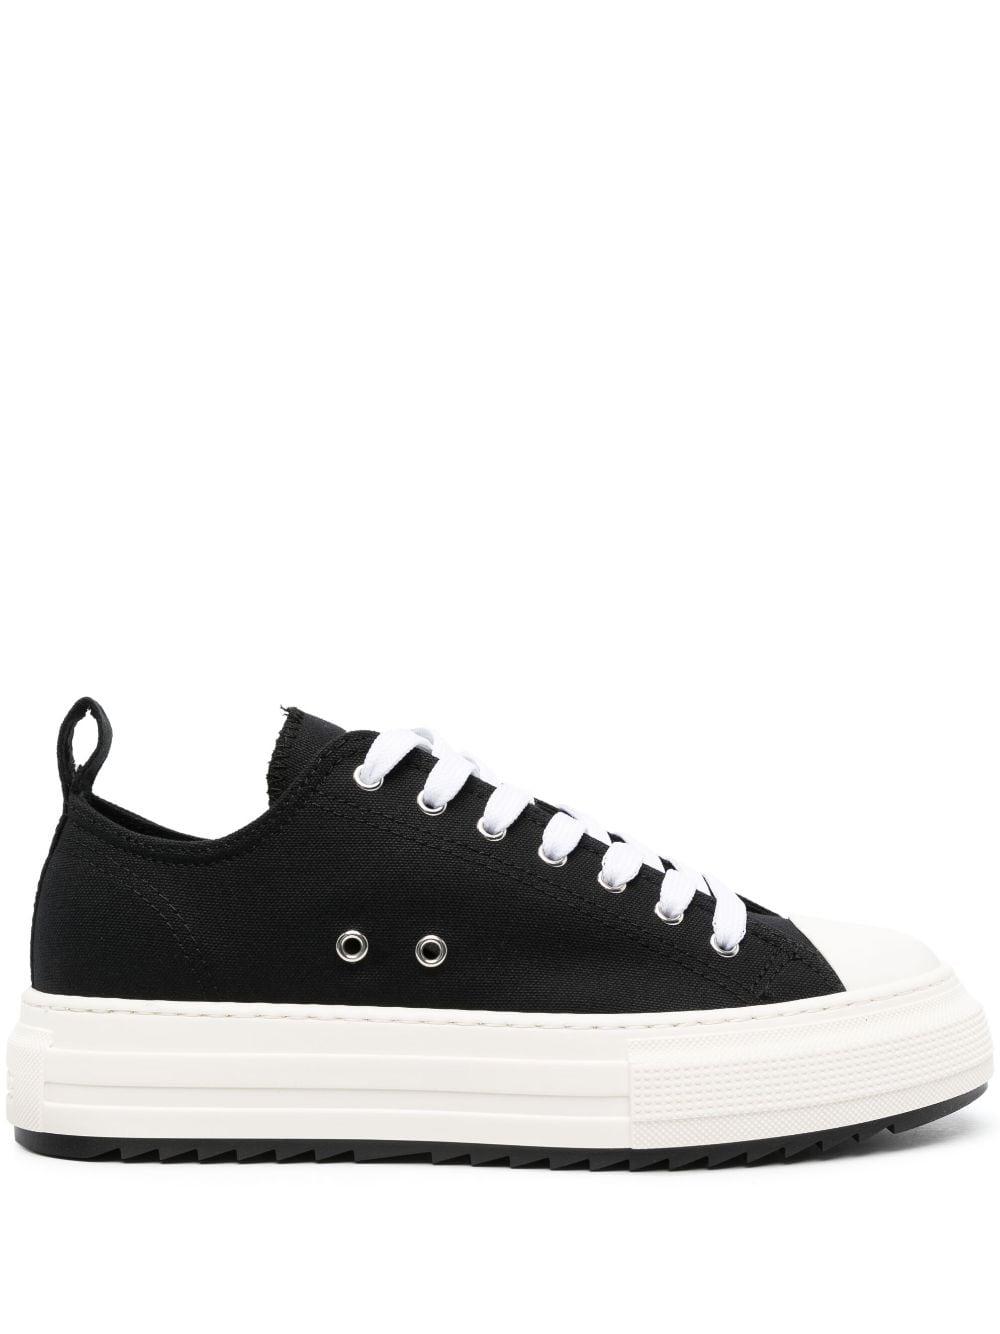 DSquared² Logo-patch Sneakers in Black for Men | Lyst